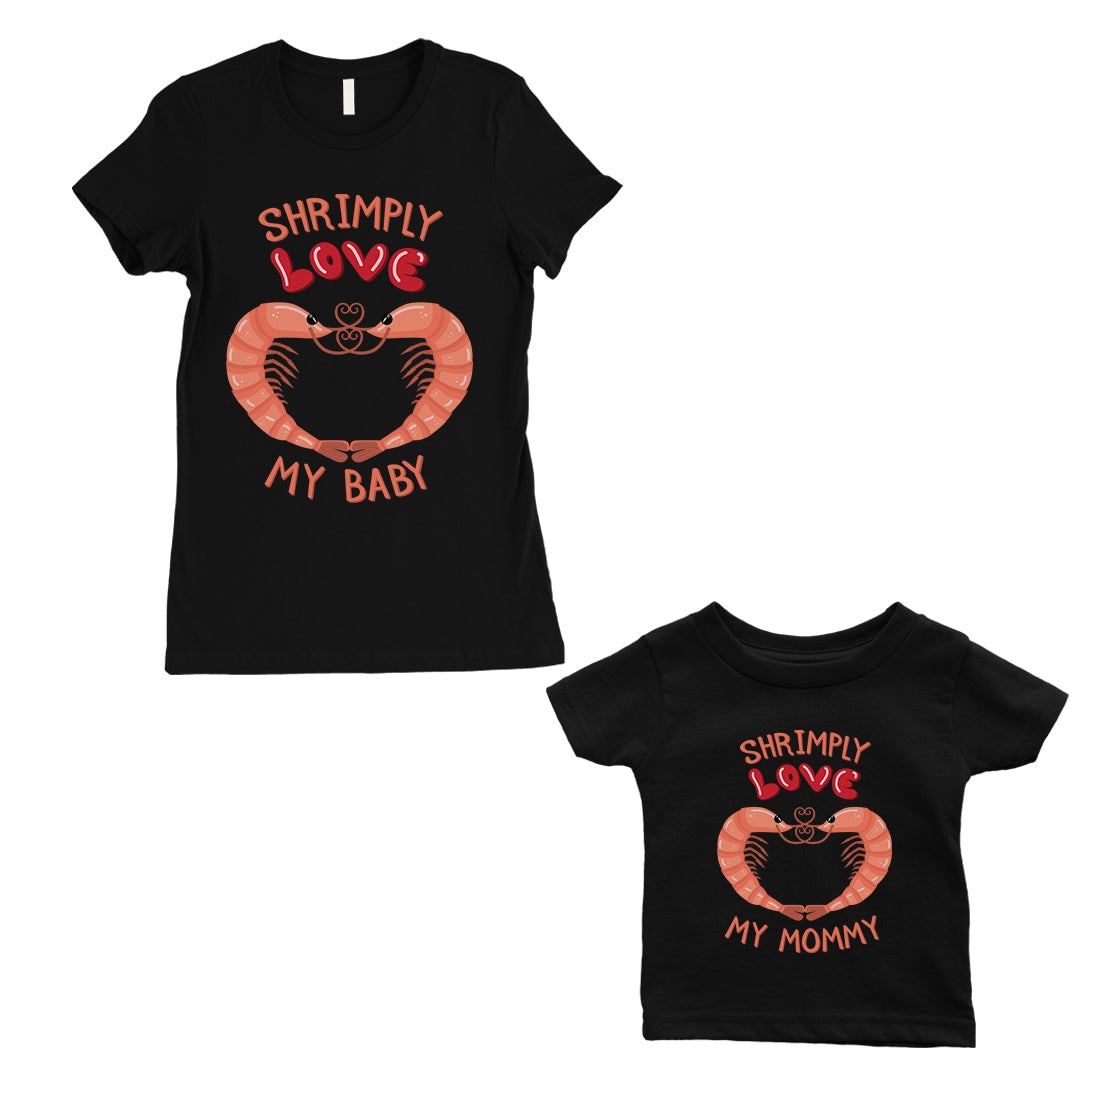 Shrimply Love Baby Mommy Mom and Baby Matching Gift Shirts Black